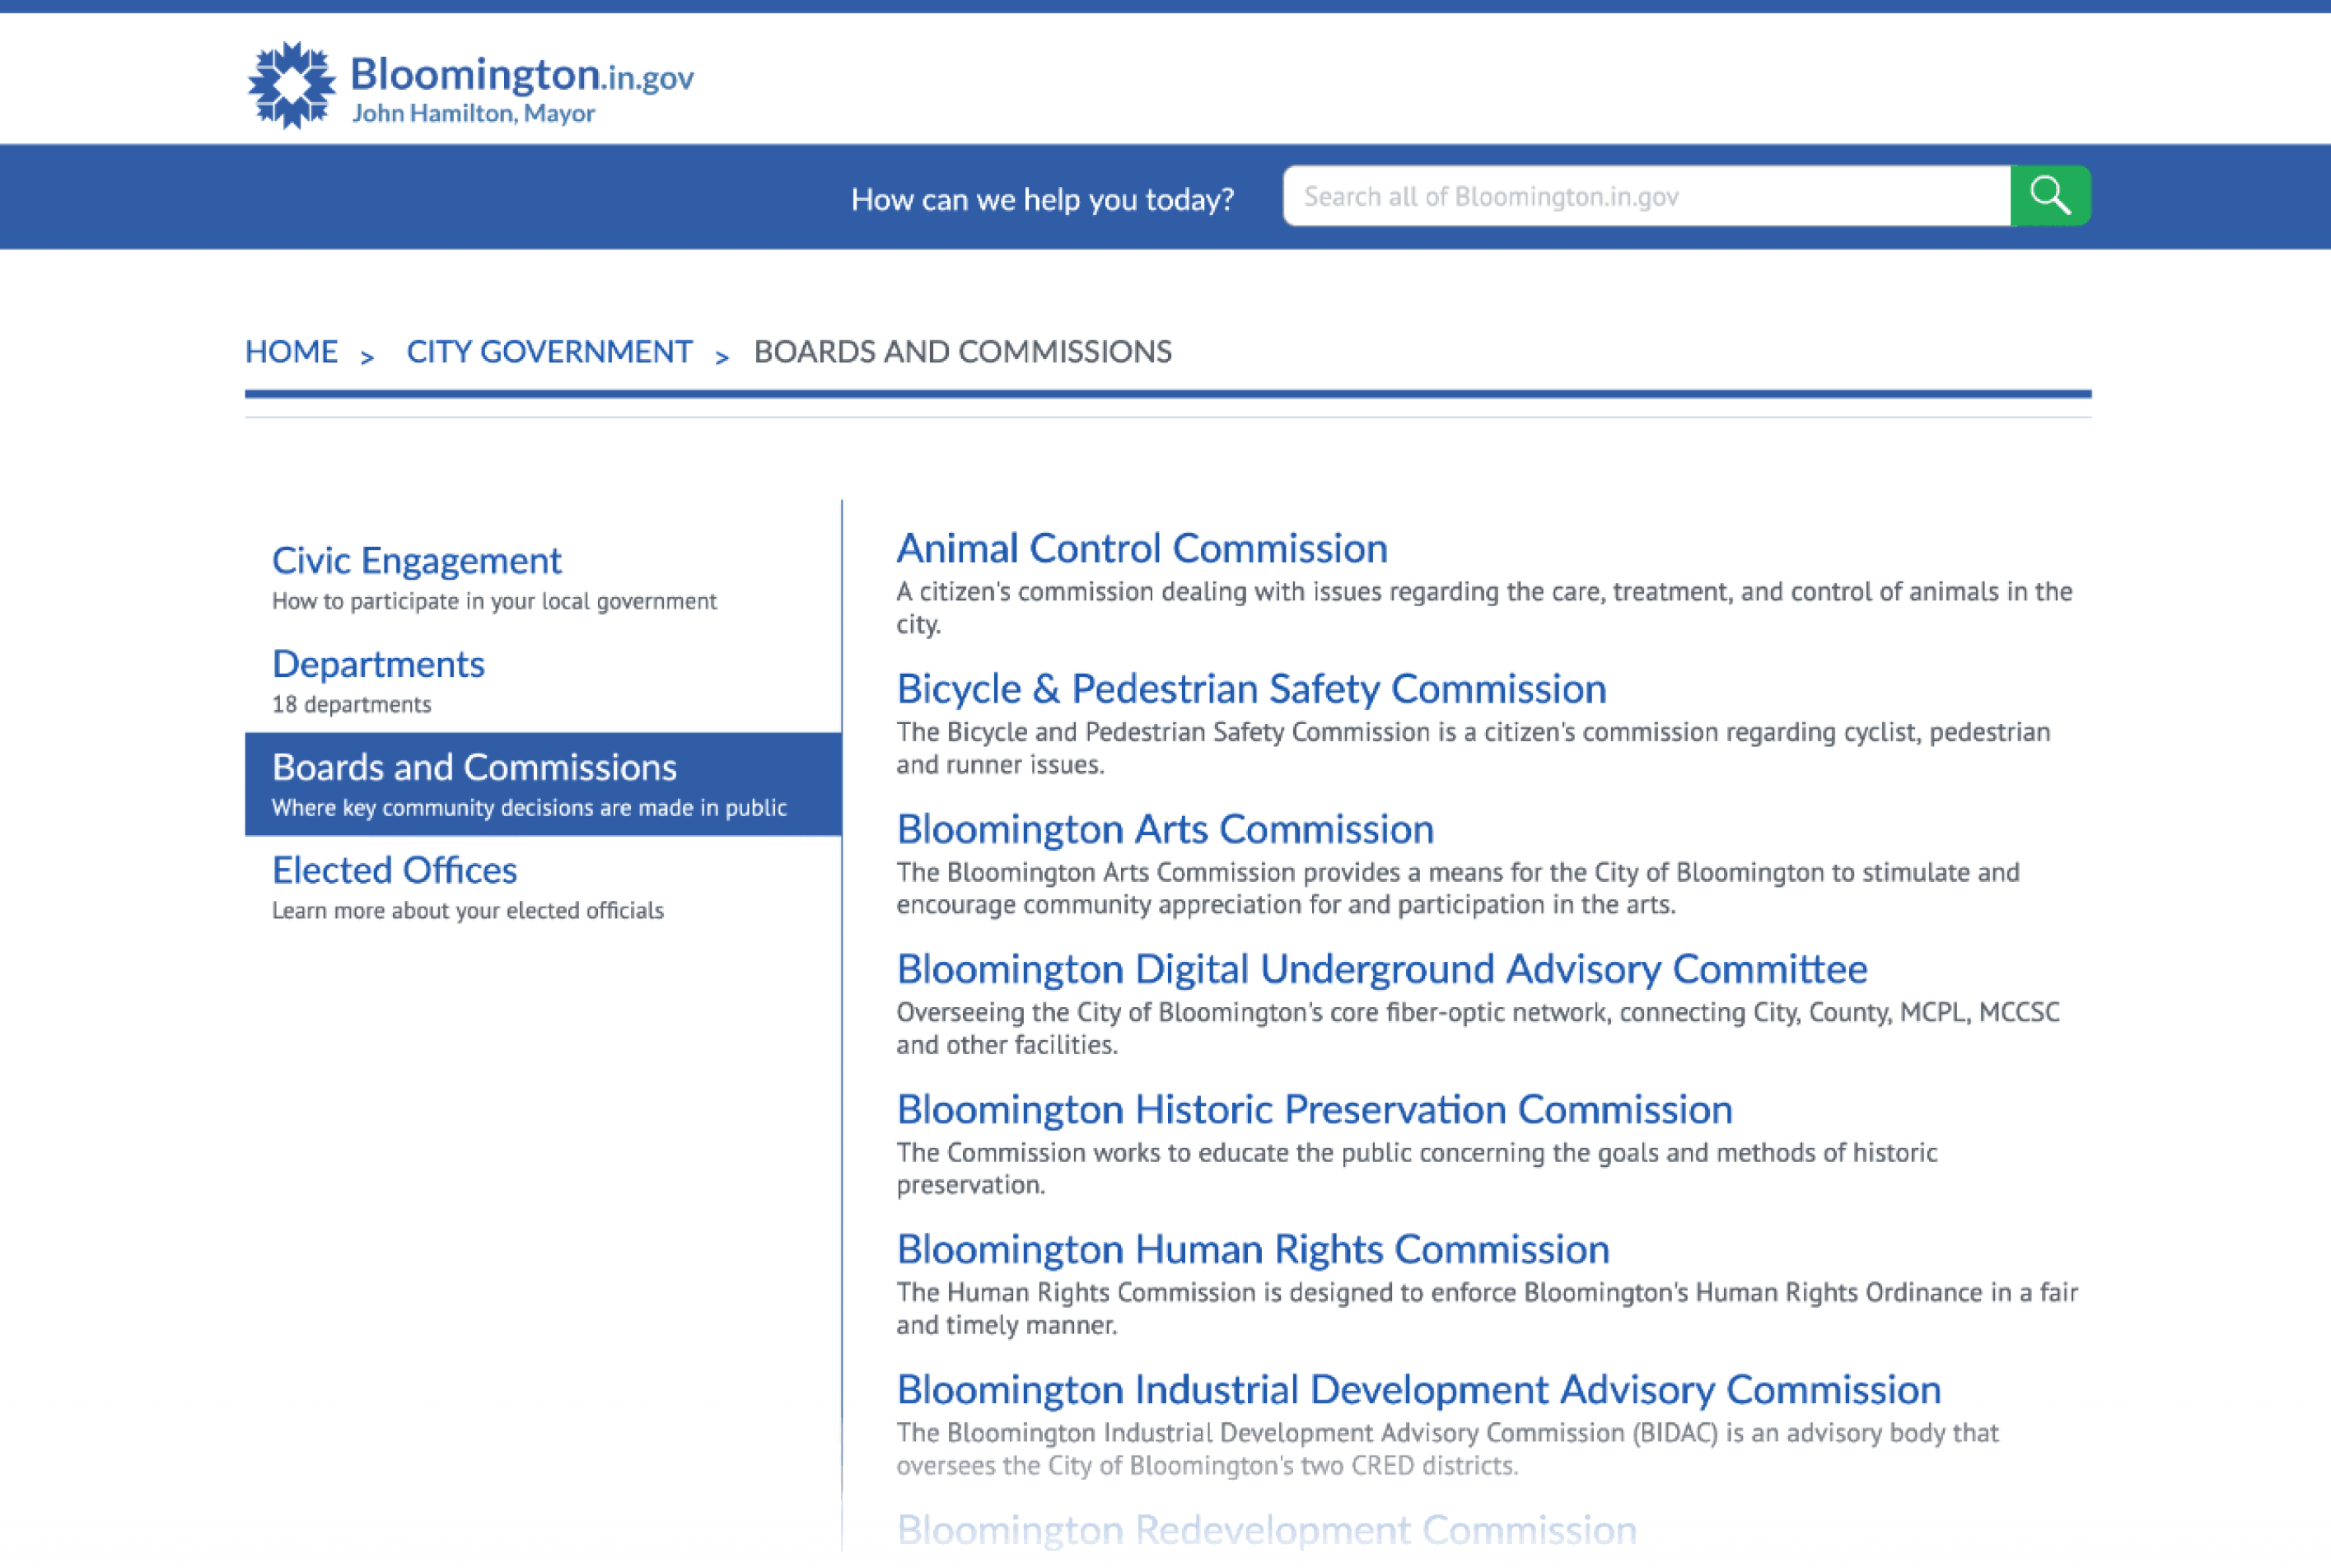 A screenshot of a directory listing for Boards and Commissions, listing several pages inside this section.